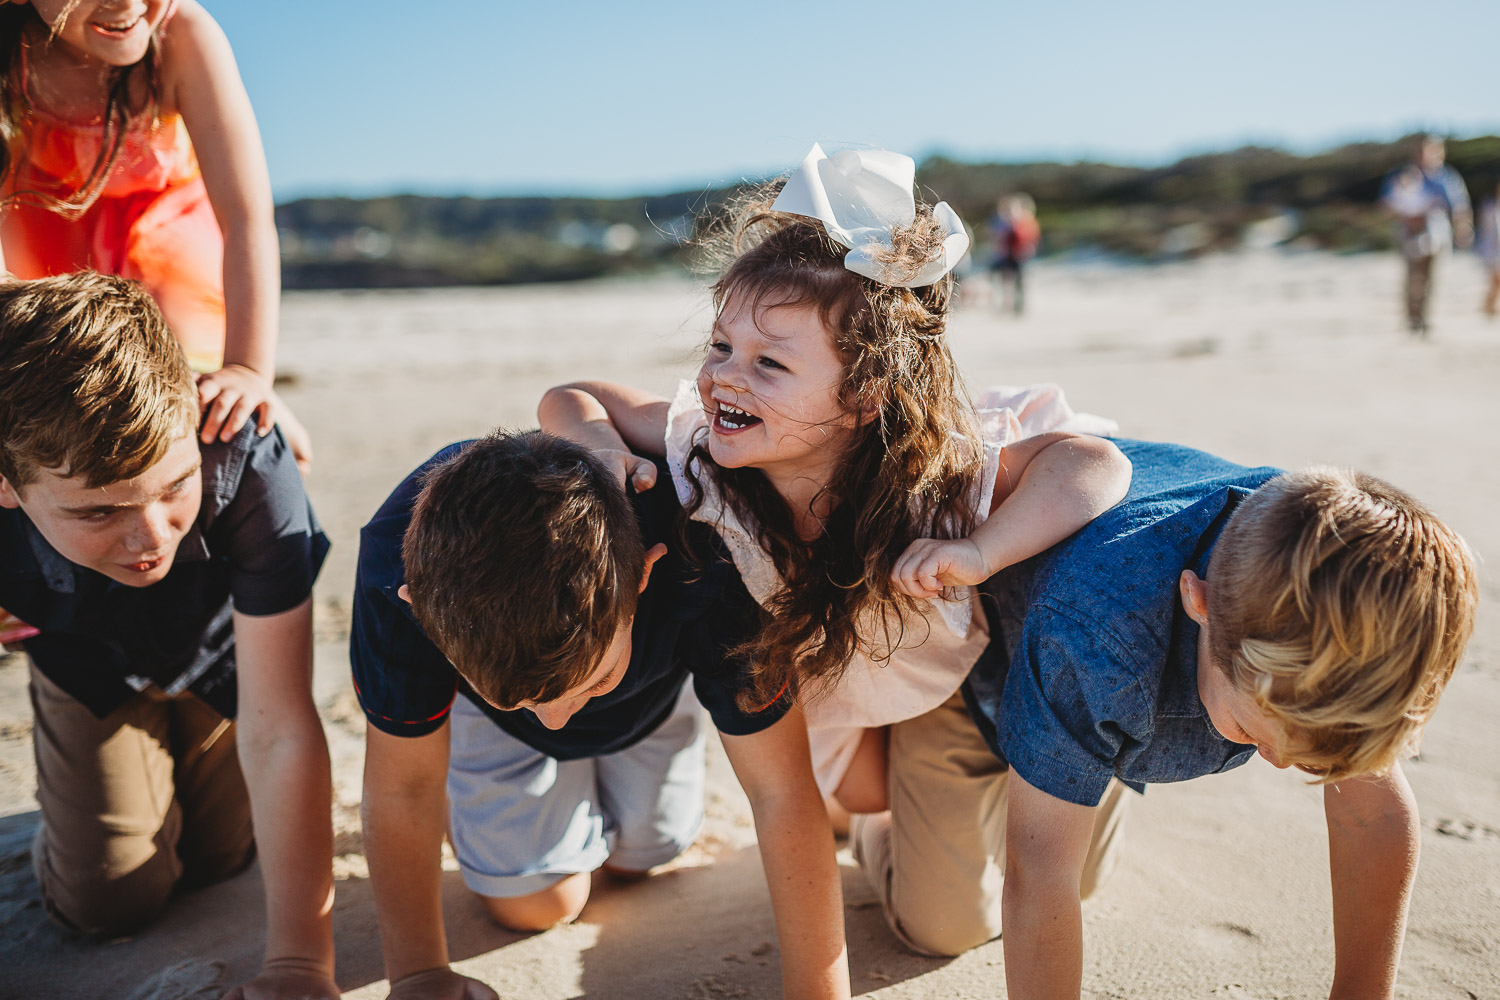 Girl falls laughing while forming human pyramid with cousins